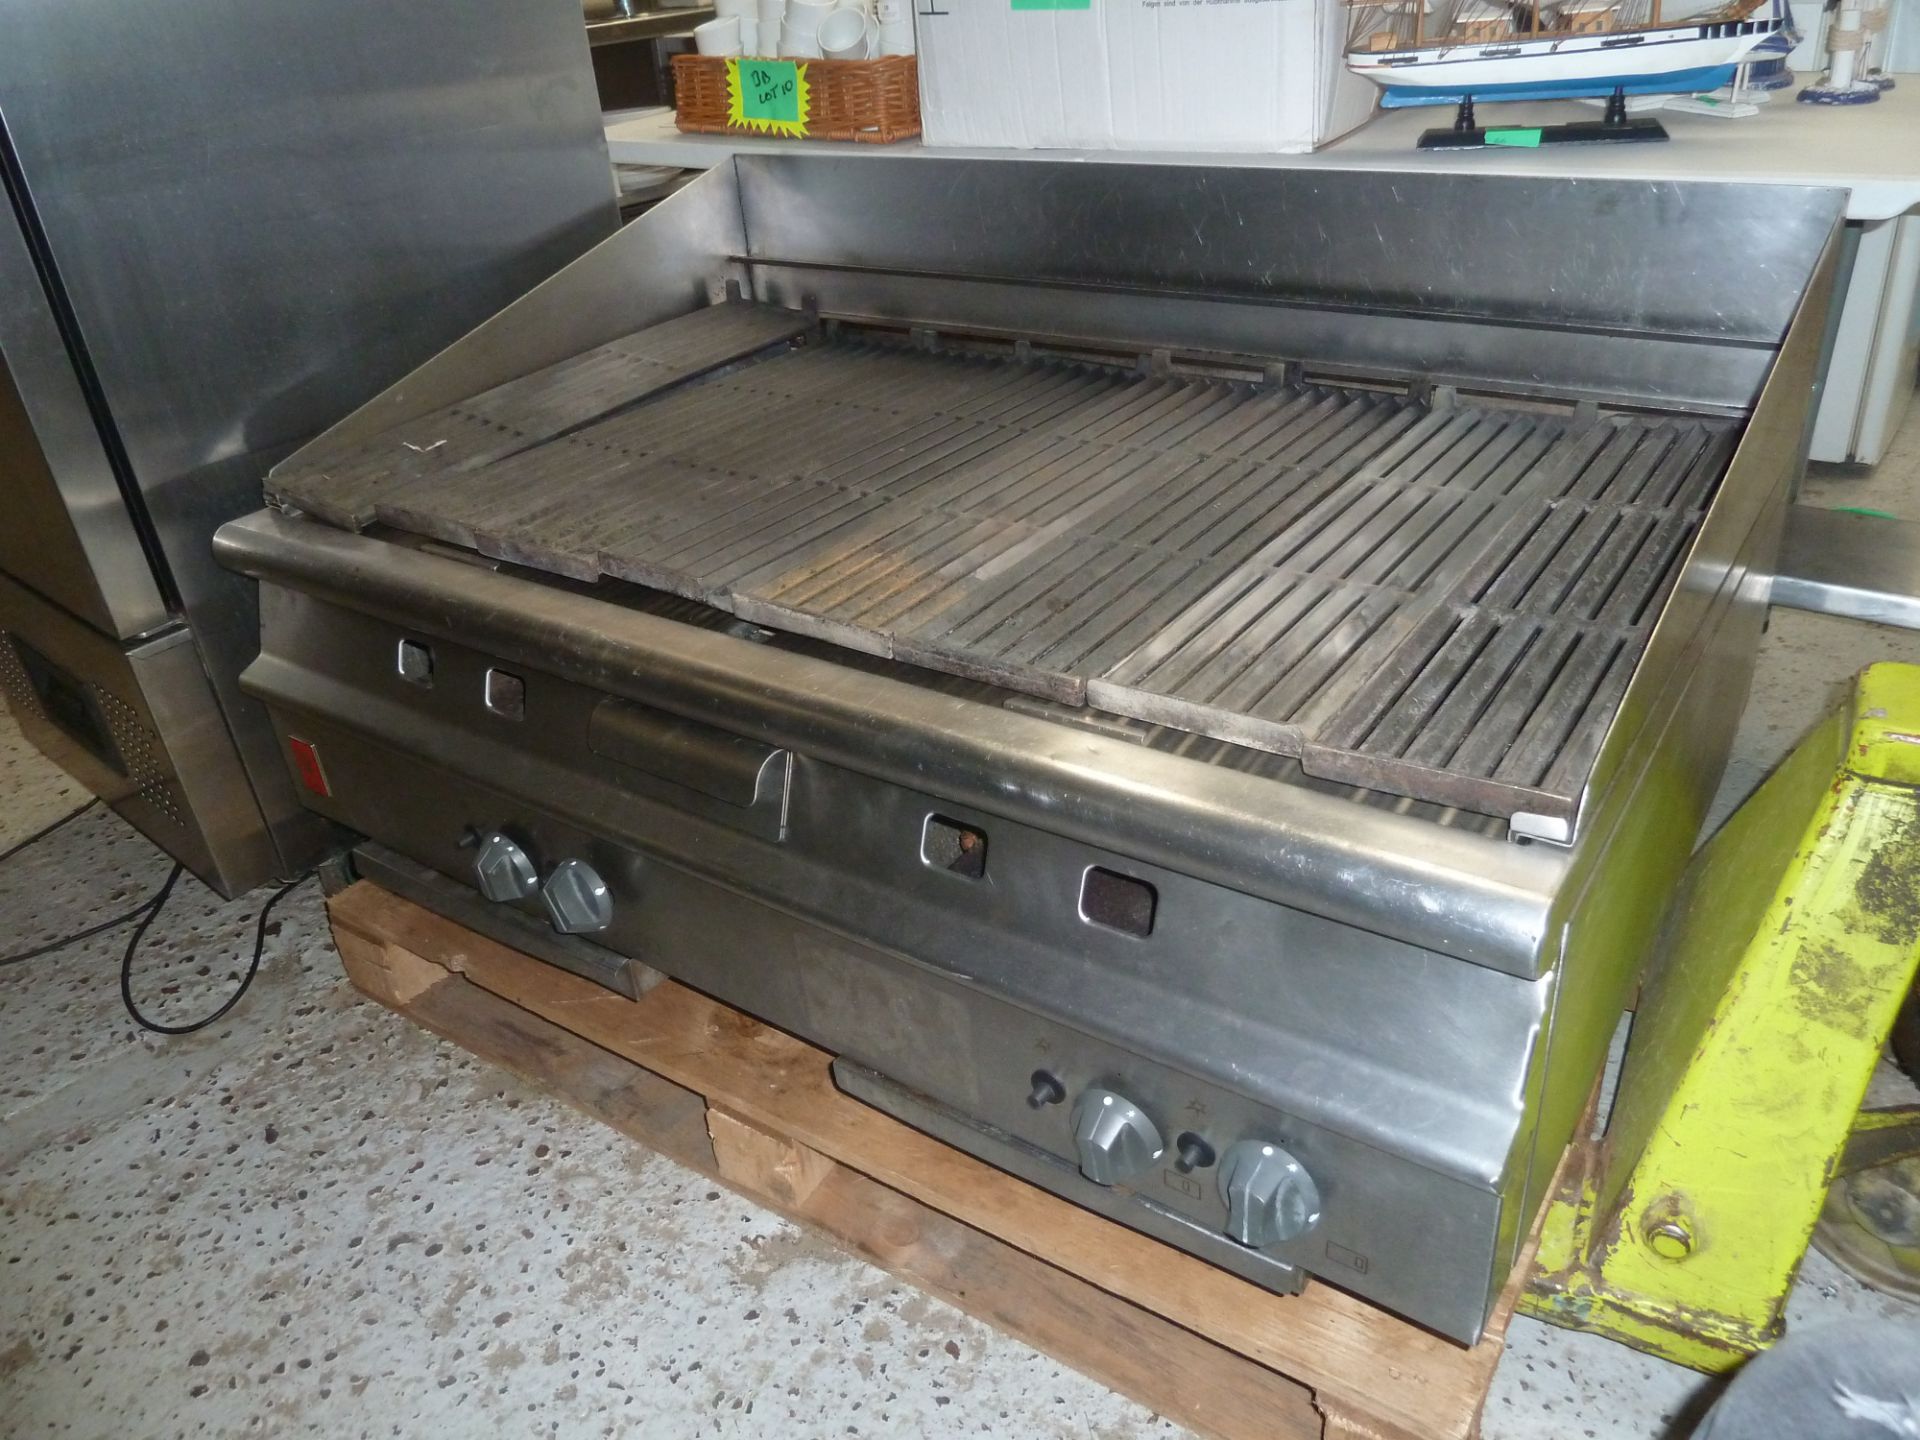 * 1200mm wide heavy duty falcon gas griddle good condition